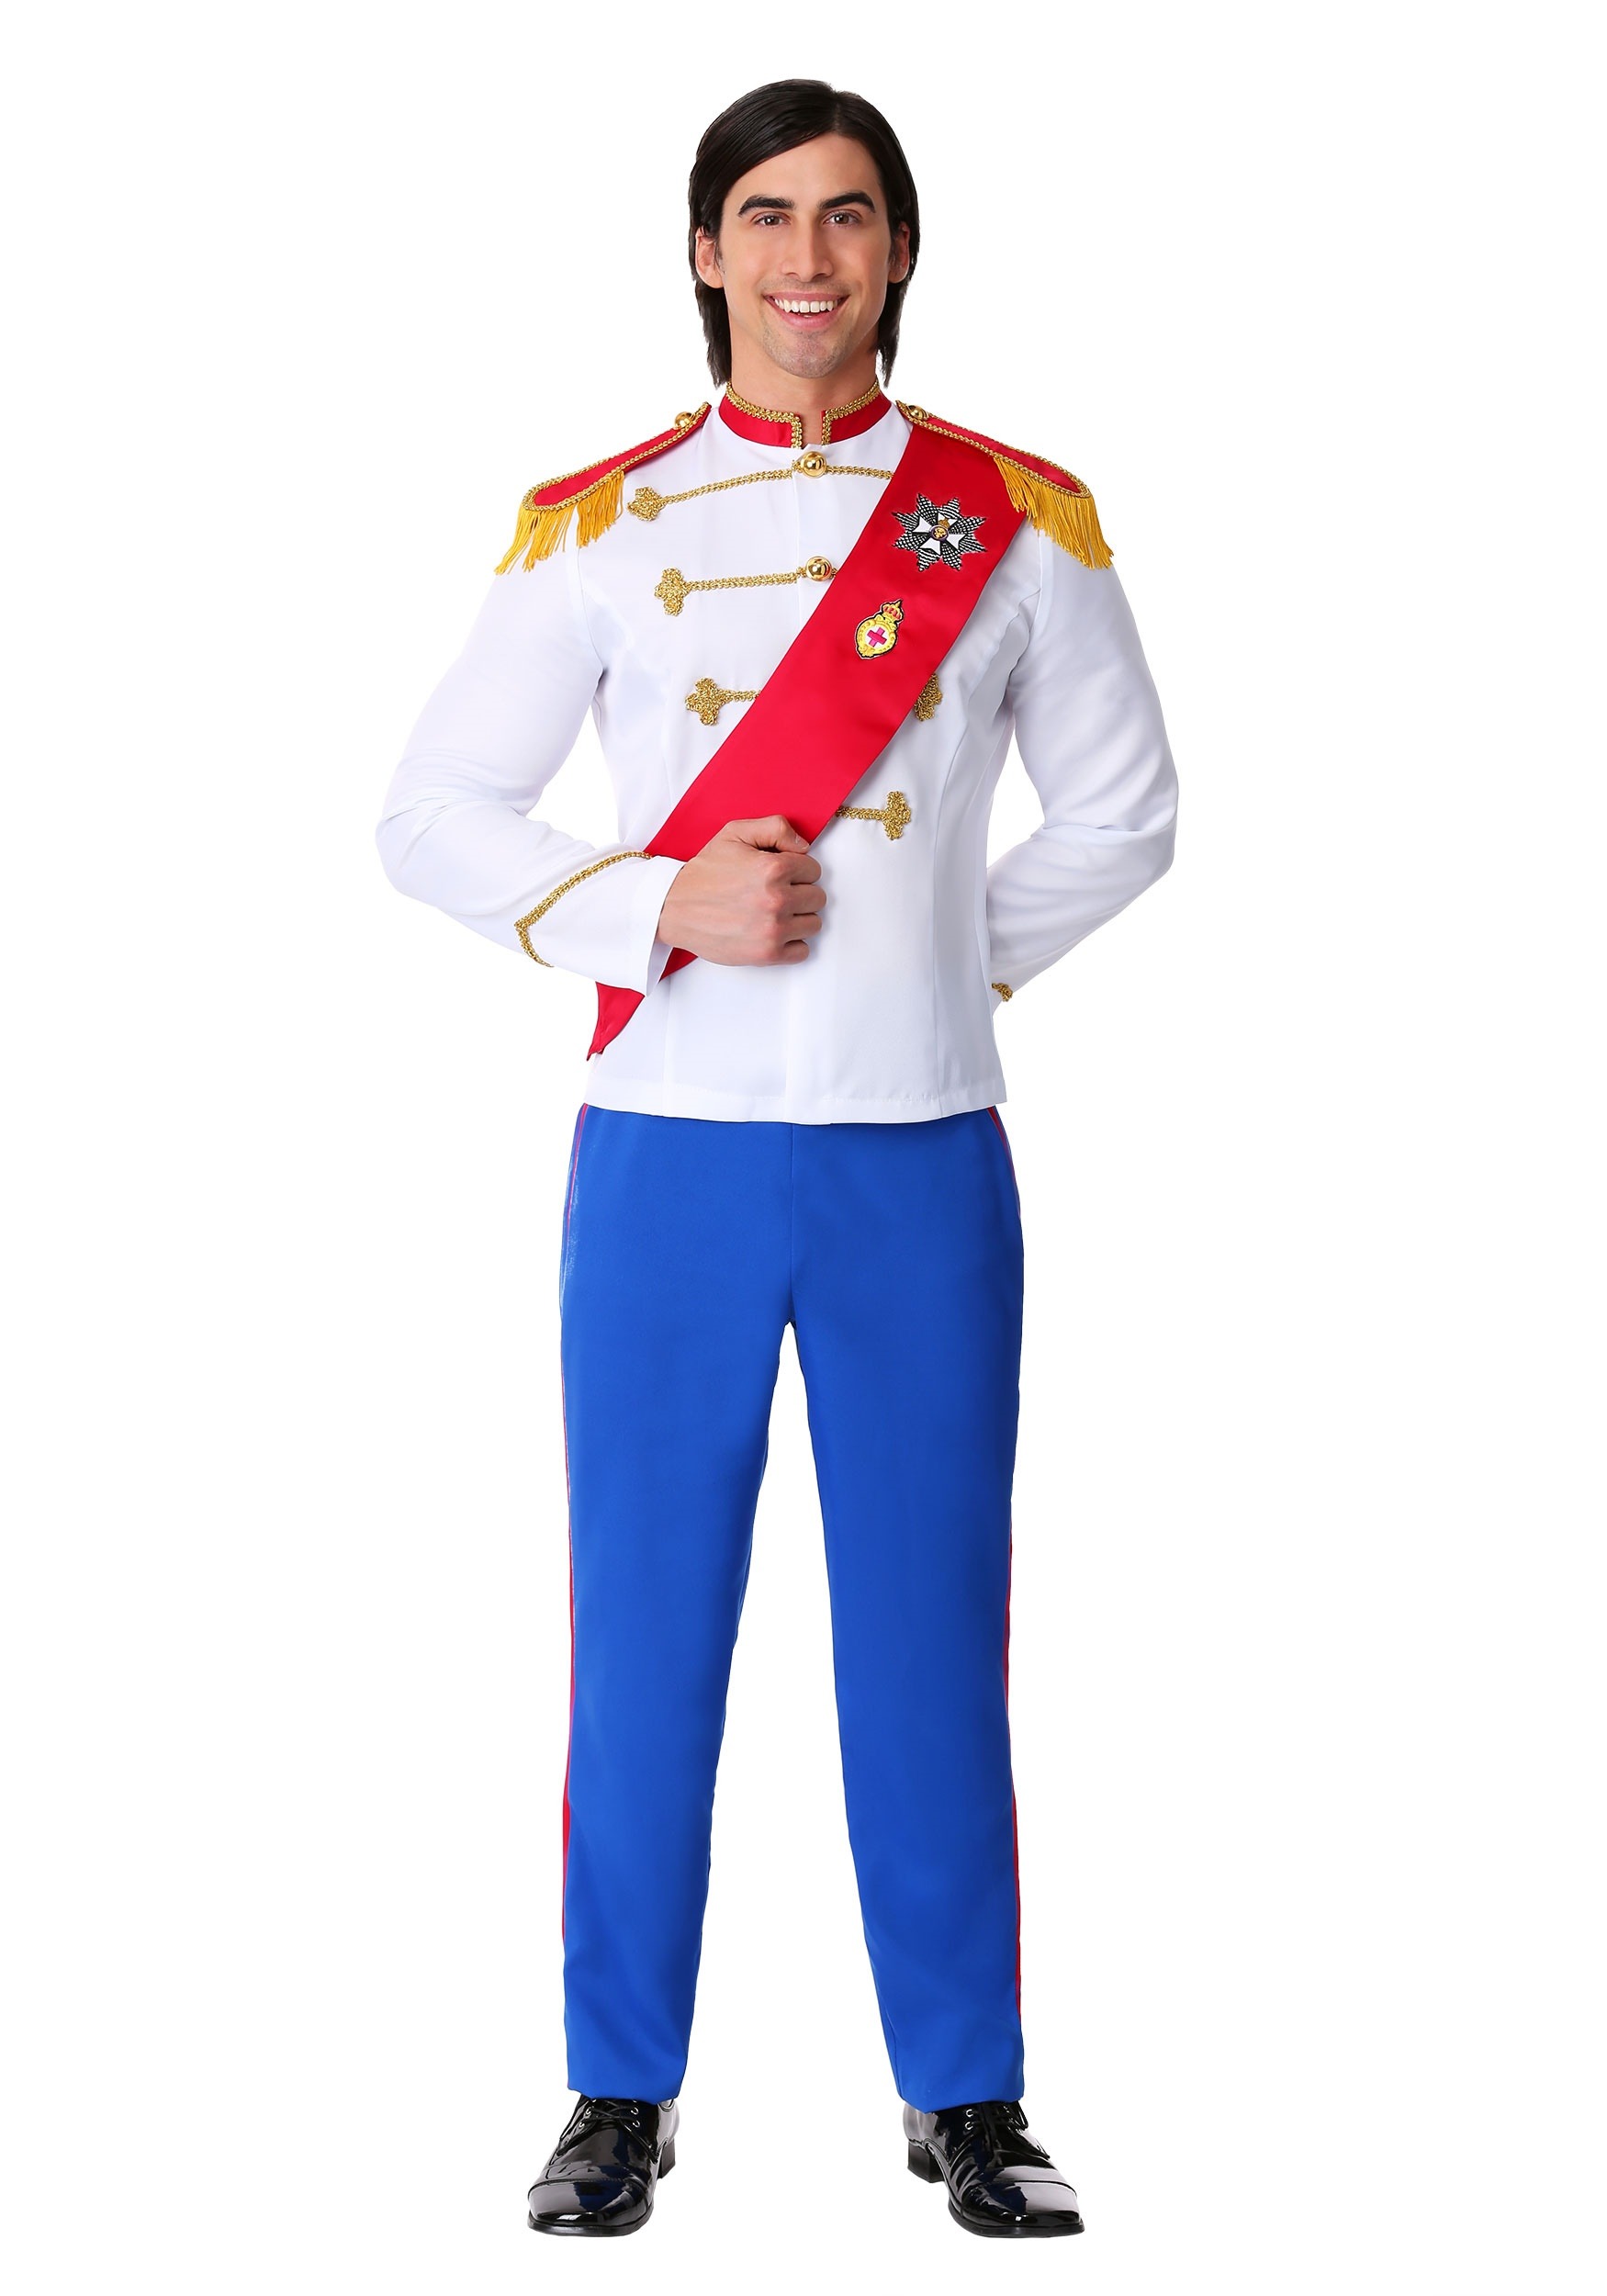 Photos - Fancy Dress CHARMING Sports FUN Costumes Plus Size Charming Prince Costume for Men Blue/Red/Wh 